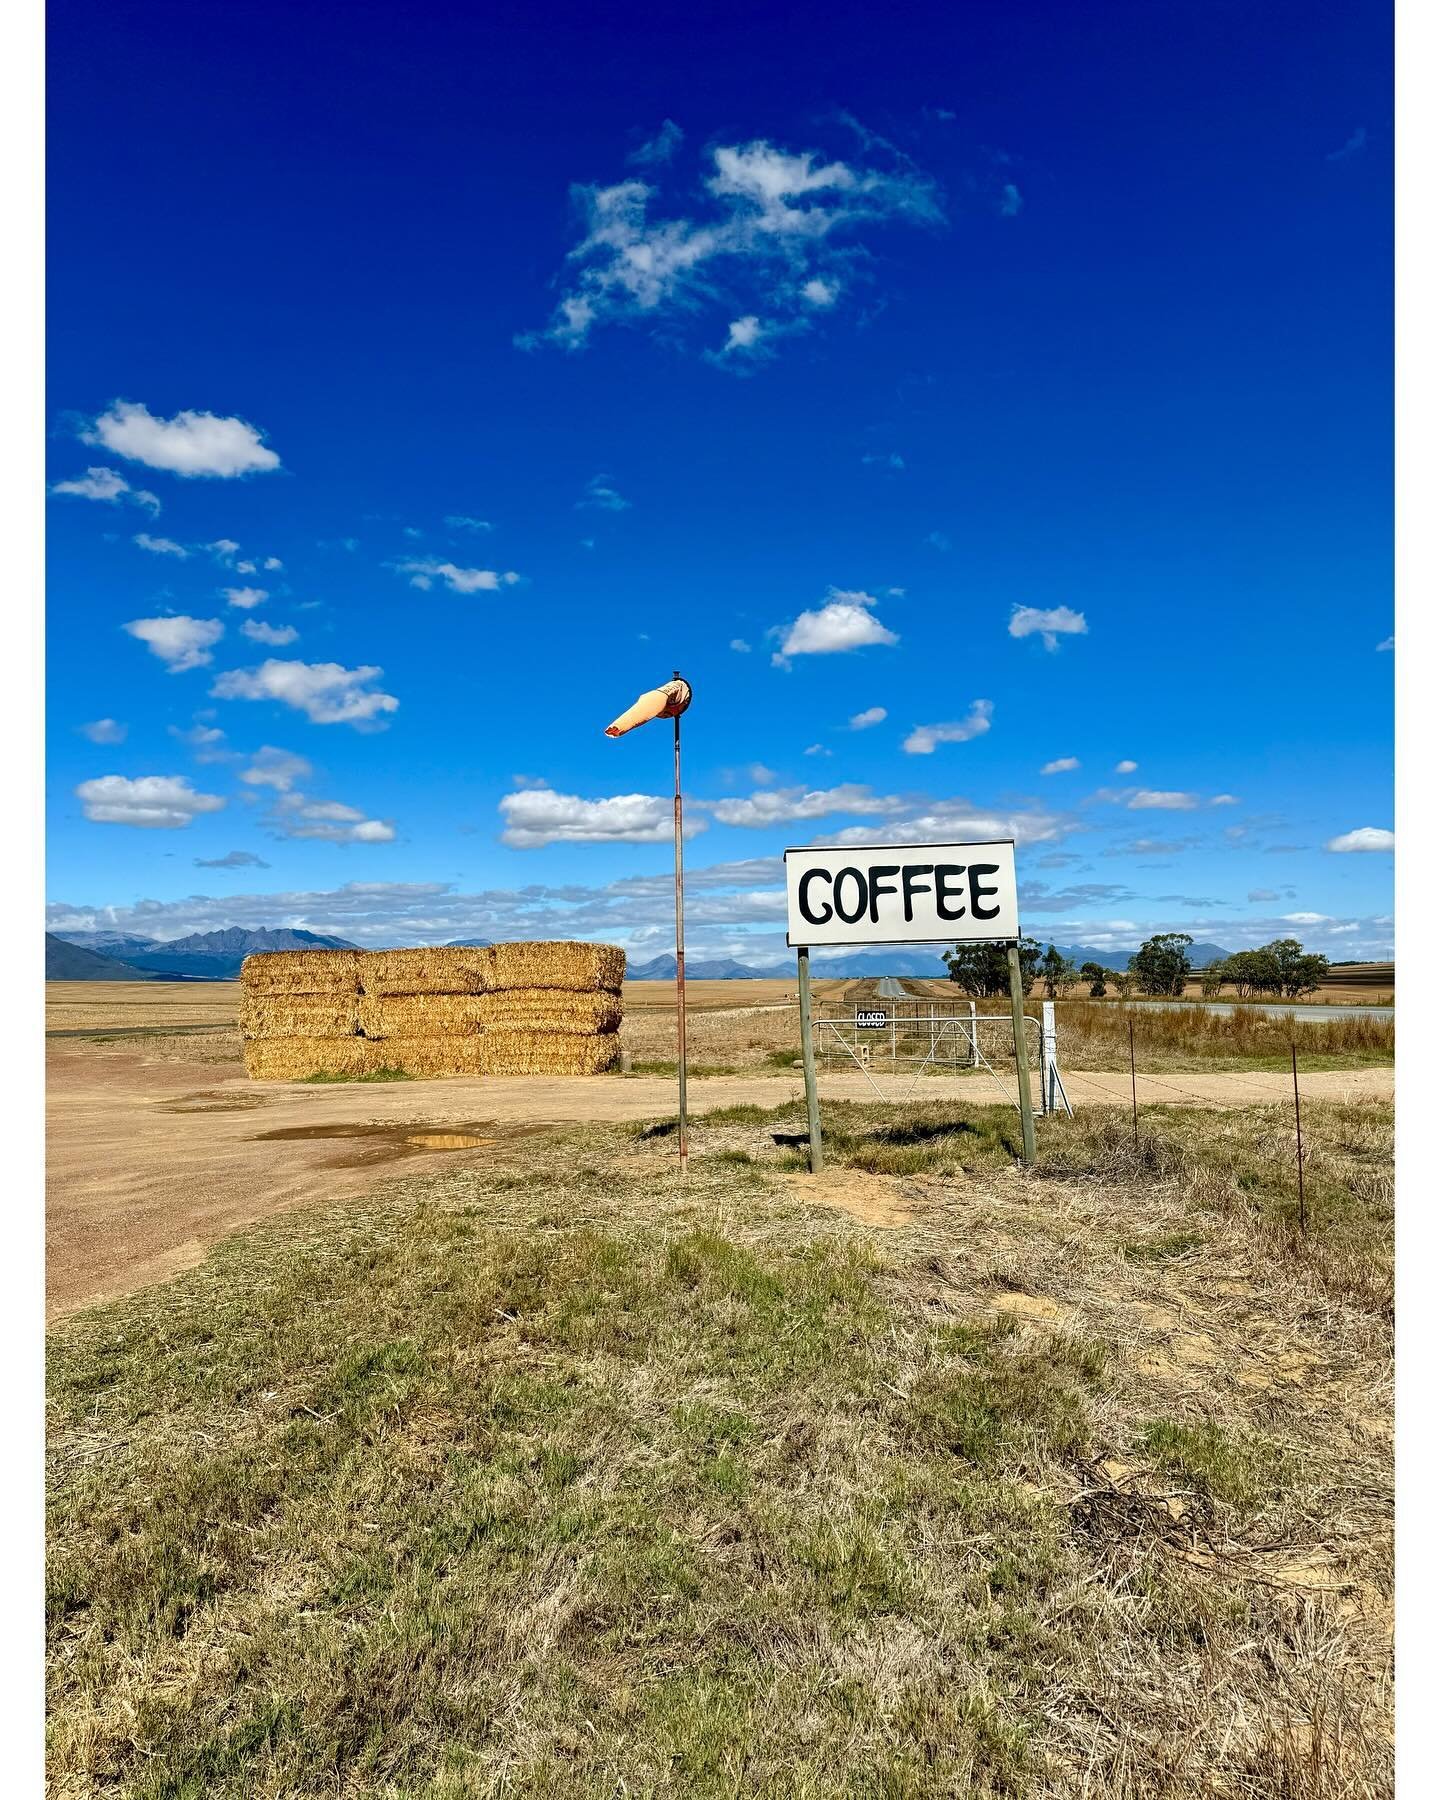 Just off the R44 about 10 miles north of Wellington is this roadside coffee stop @moralecoffeetogo nothing but fields and endless views of the mountains. I just love this place.
.
.
.
.
.
#coffee #roadside #wellington #capetown #southafrica #sa #road